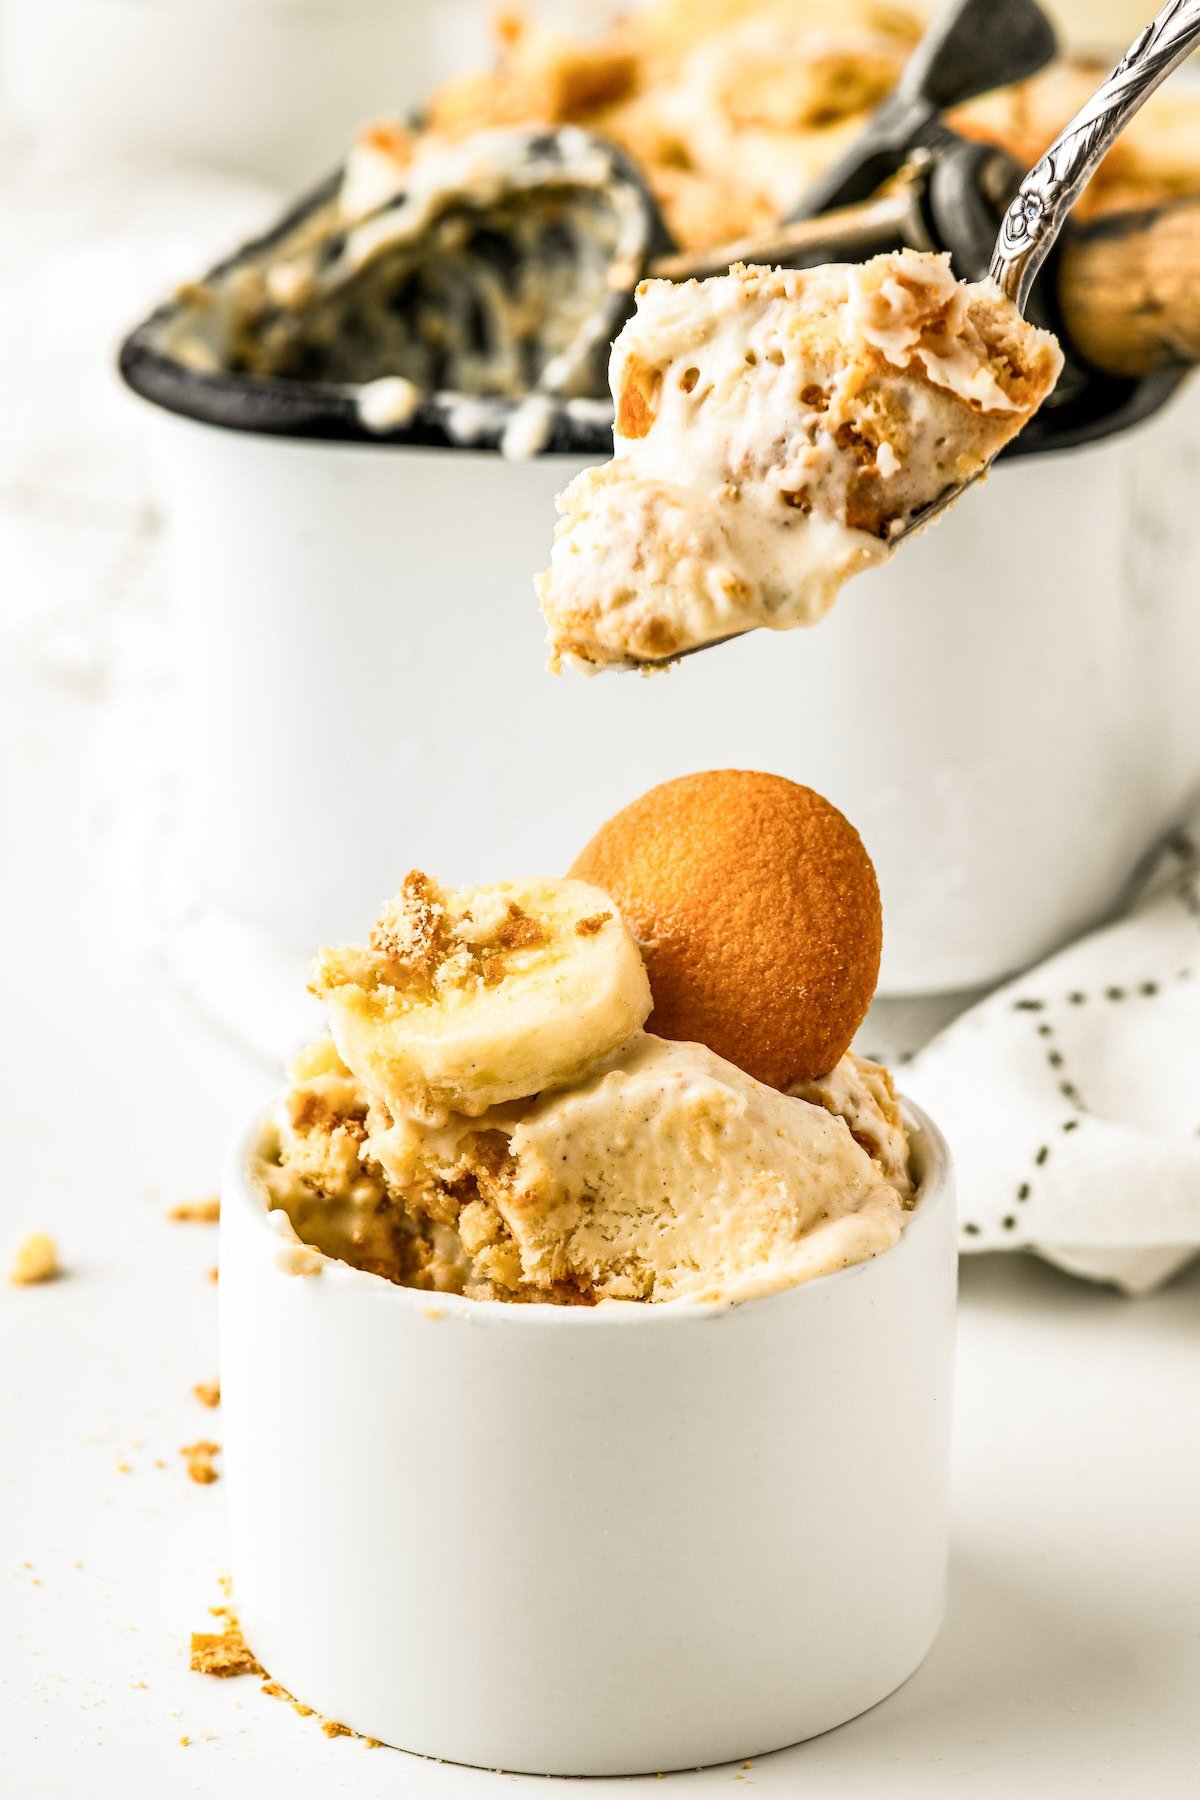 A serving of creamy banana pudding ice cream with nilla wafers and bananas in a bowl with a spoon taking a bite.